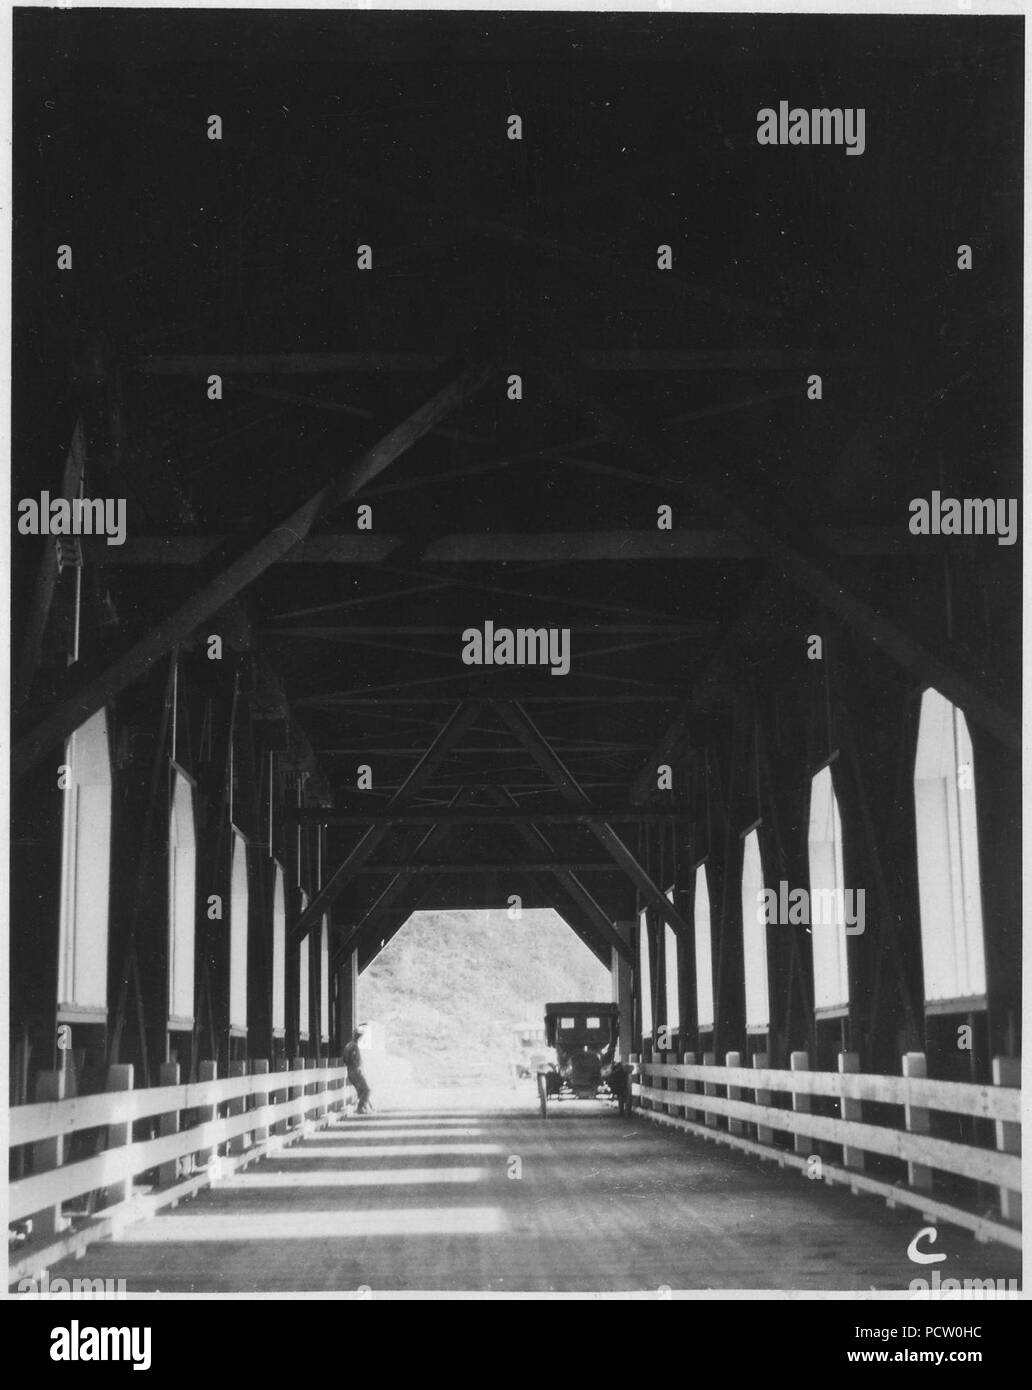 Alsea River Bridge, Station 60, Section 9. Looking through spans from South end. Shows stiff construction and well... - Stock Photo